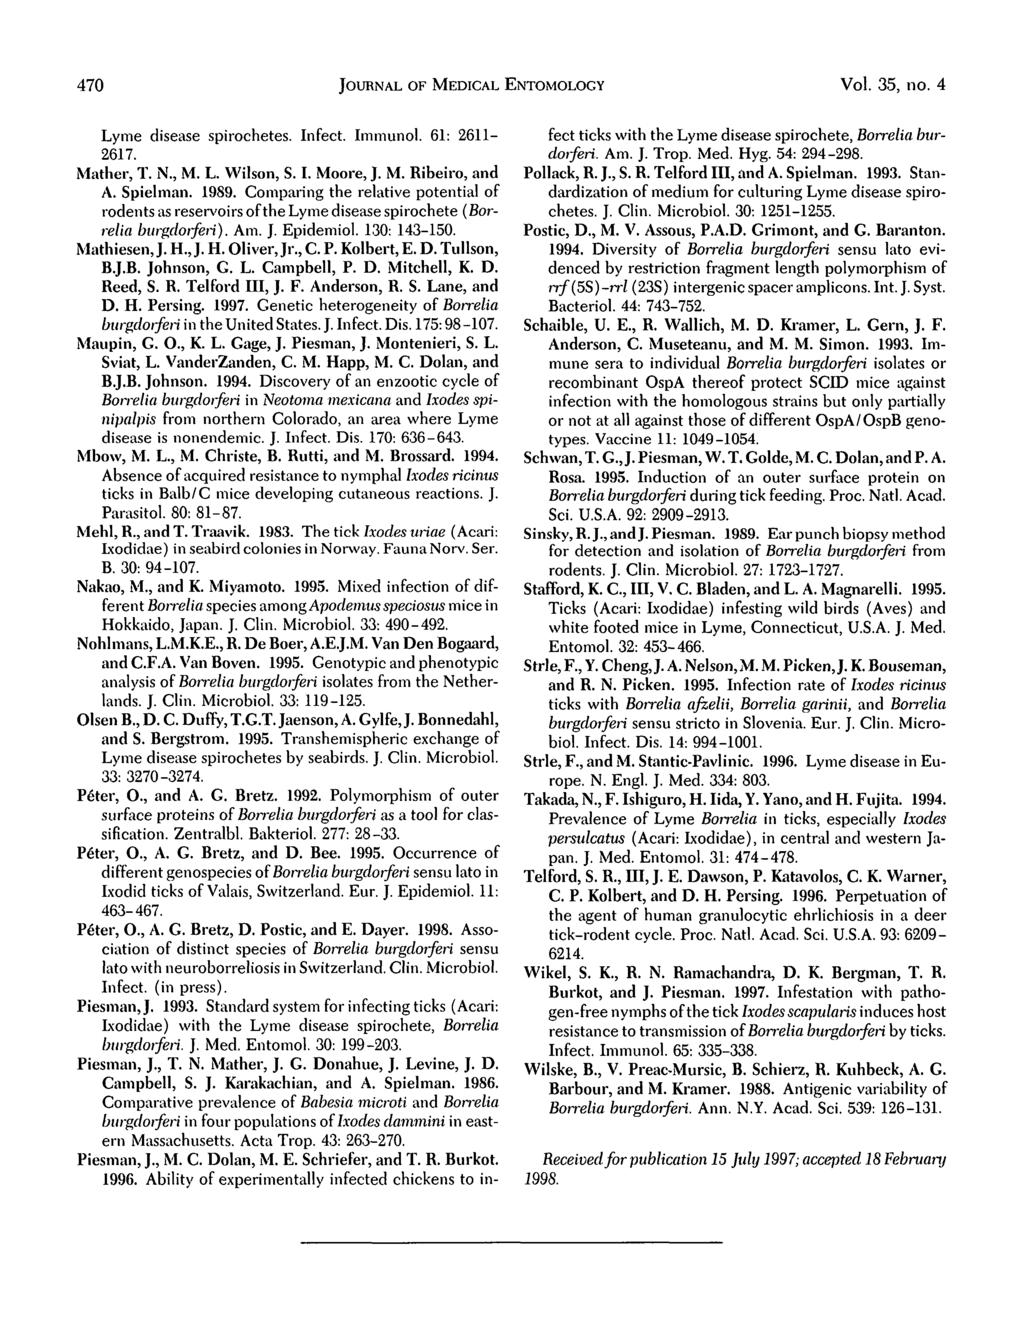 40 JOURNAL OF MEDICAL ENTOMOLOGY Vol. 35, no. 4 Lyme disease spirochetes. Infect. Immunol. 61: 2611-261. Mather, T. N., M. L. Wilson, S. I. Moore, J. M. Ribeiro, and A. Spielman. 1989.